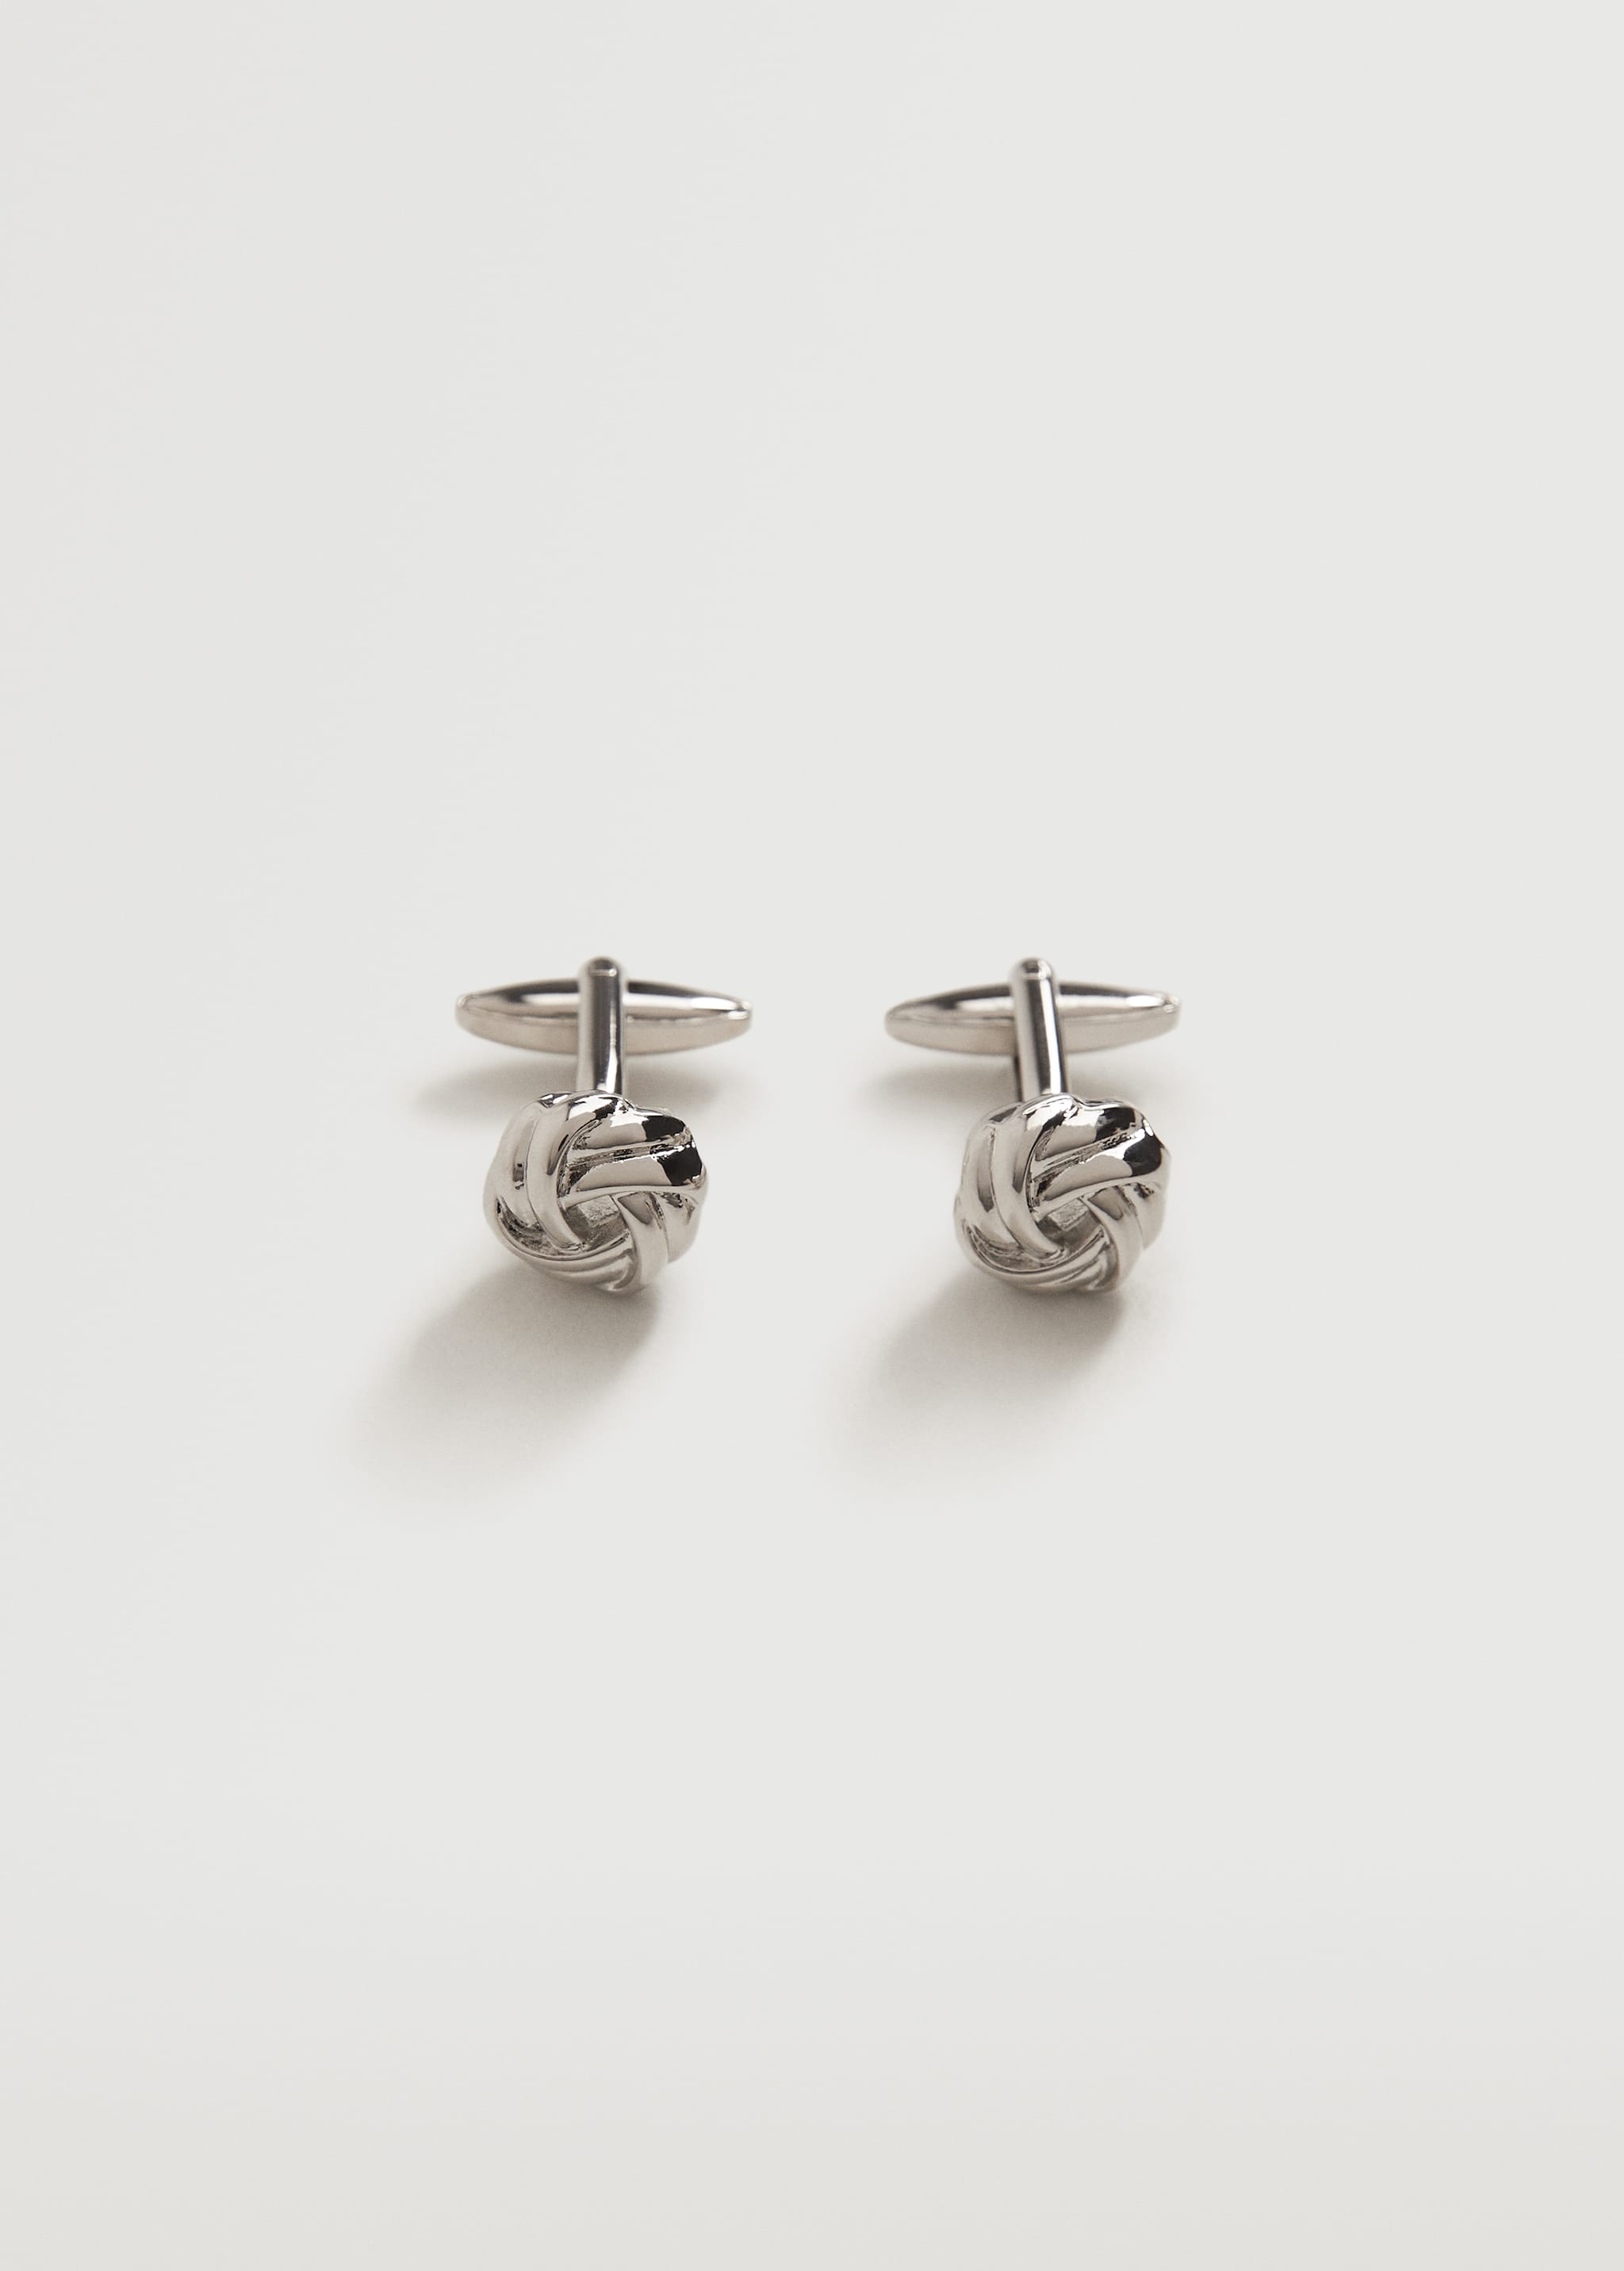 Knot Cufflinks - Article without model